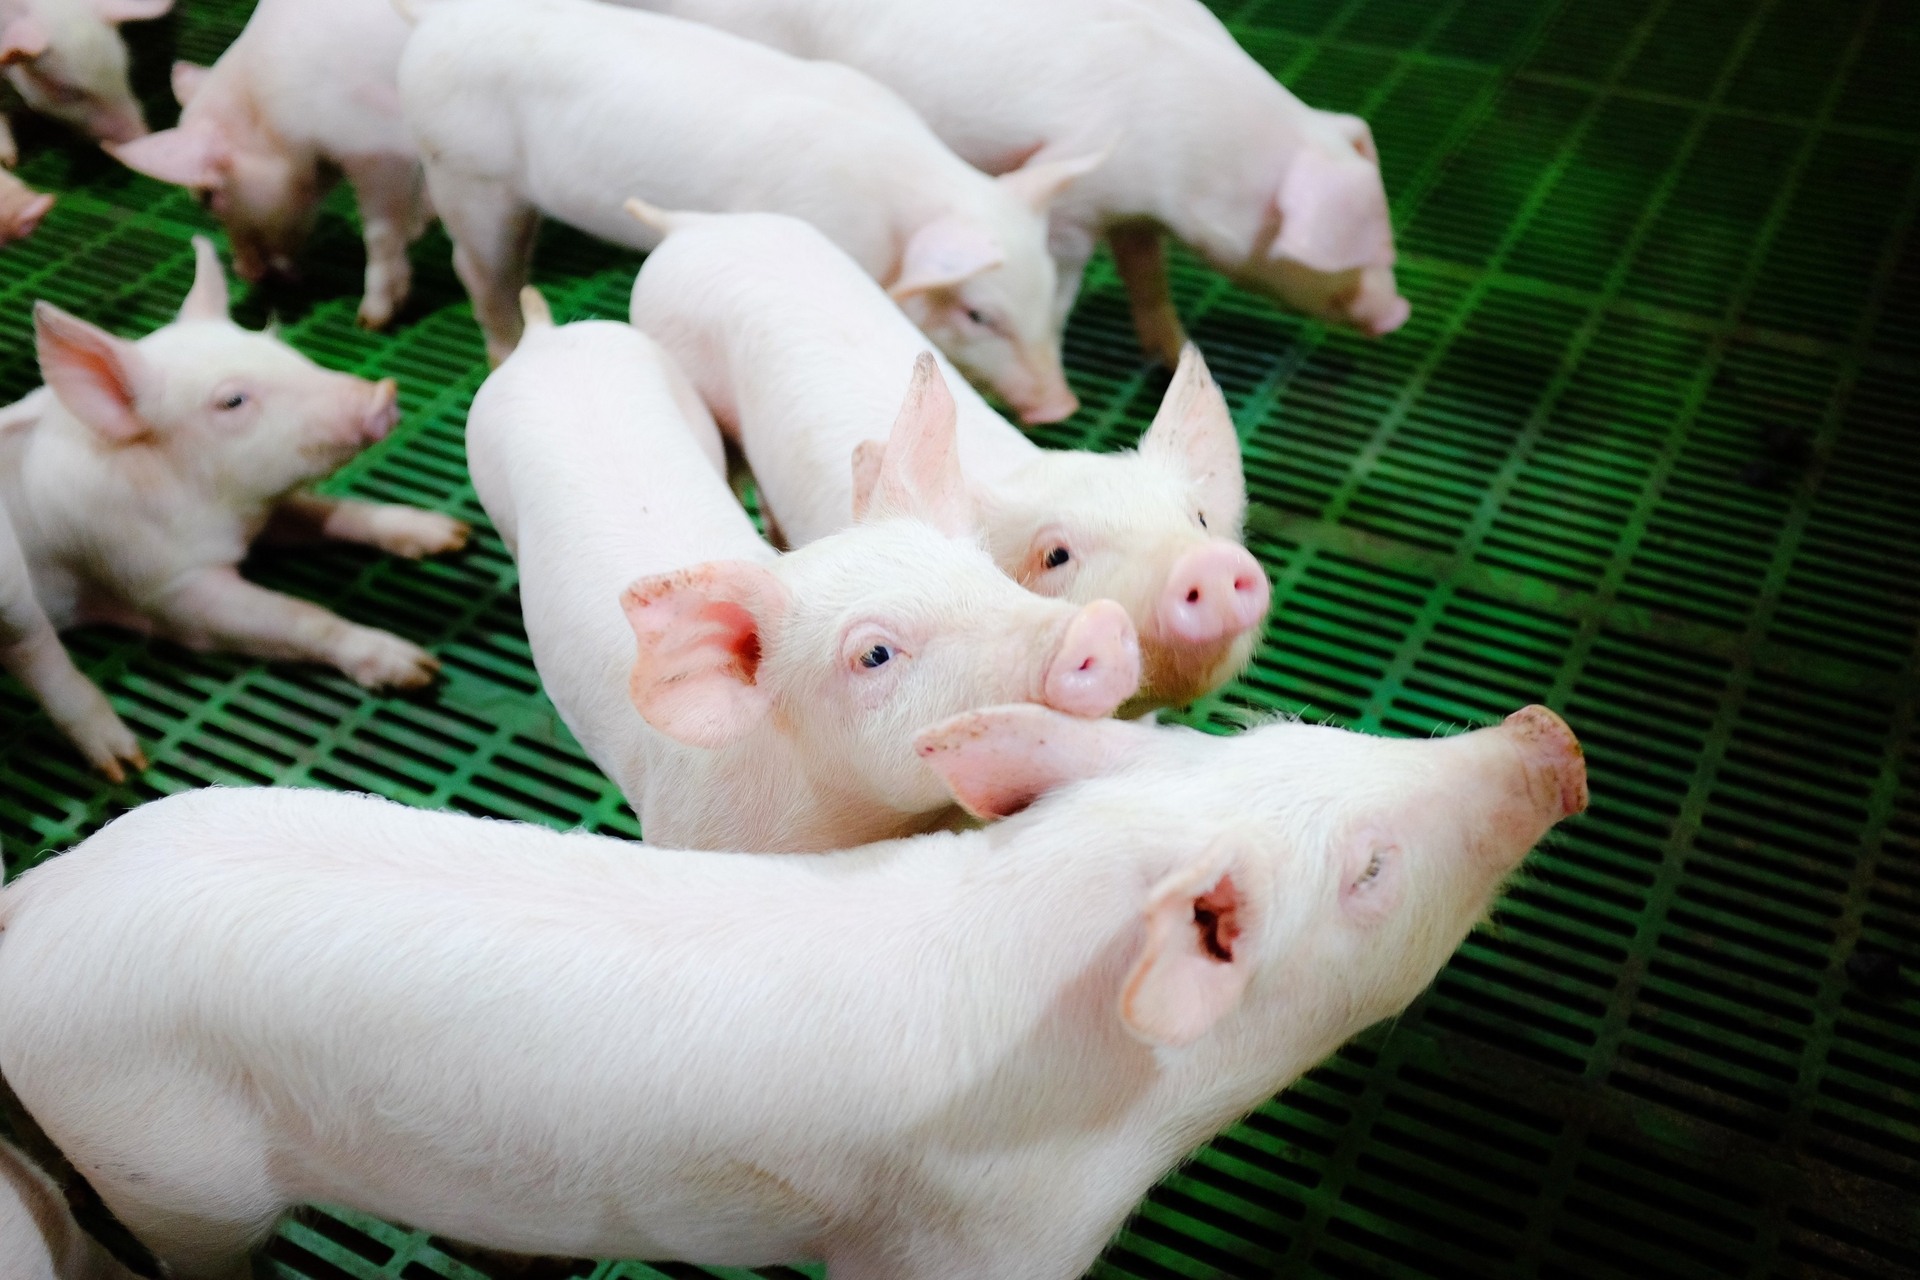 The market has shown many positive signs as the price of pigs fluctuated around VND 60,000/kg in the last two months.